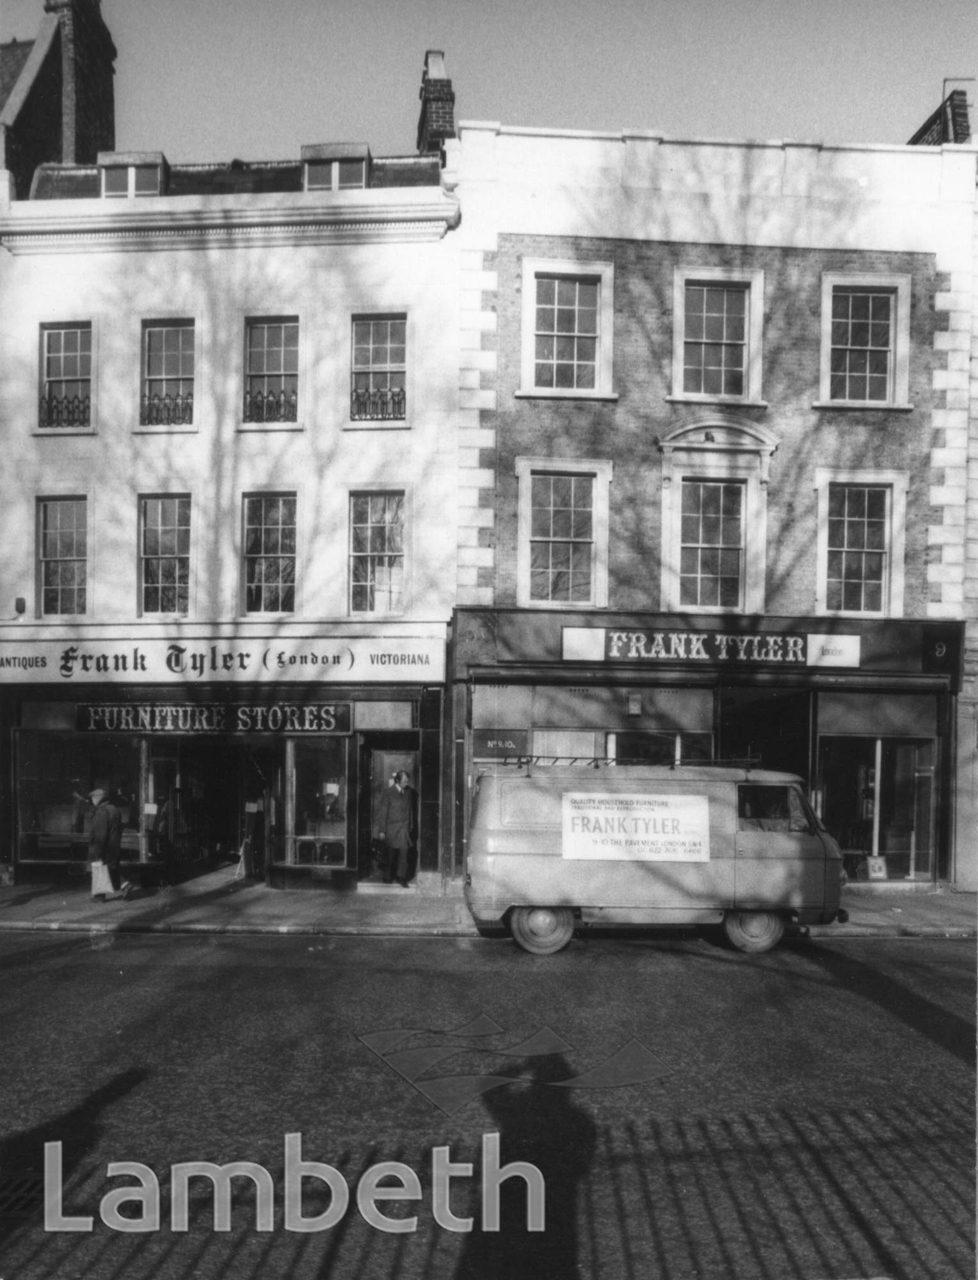 Frank Tyler Furniture Stores The Pavement Clapham